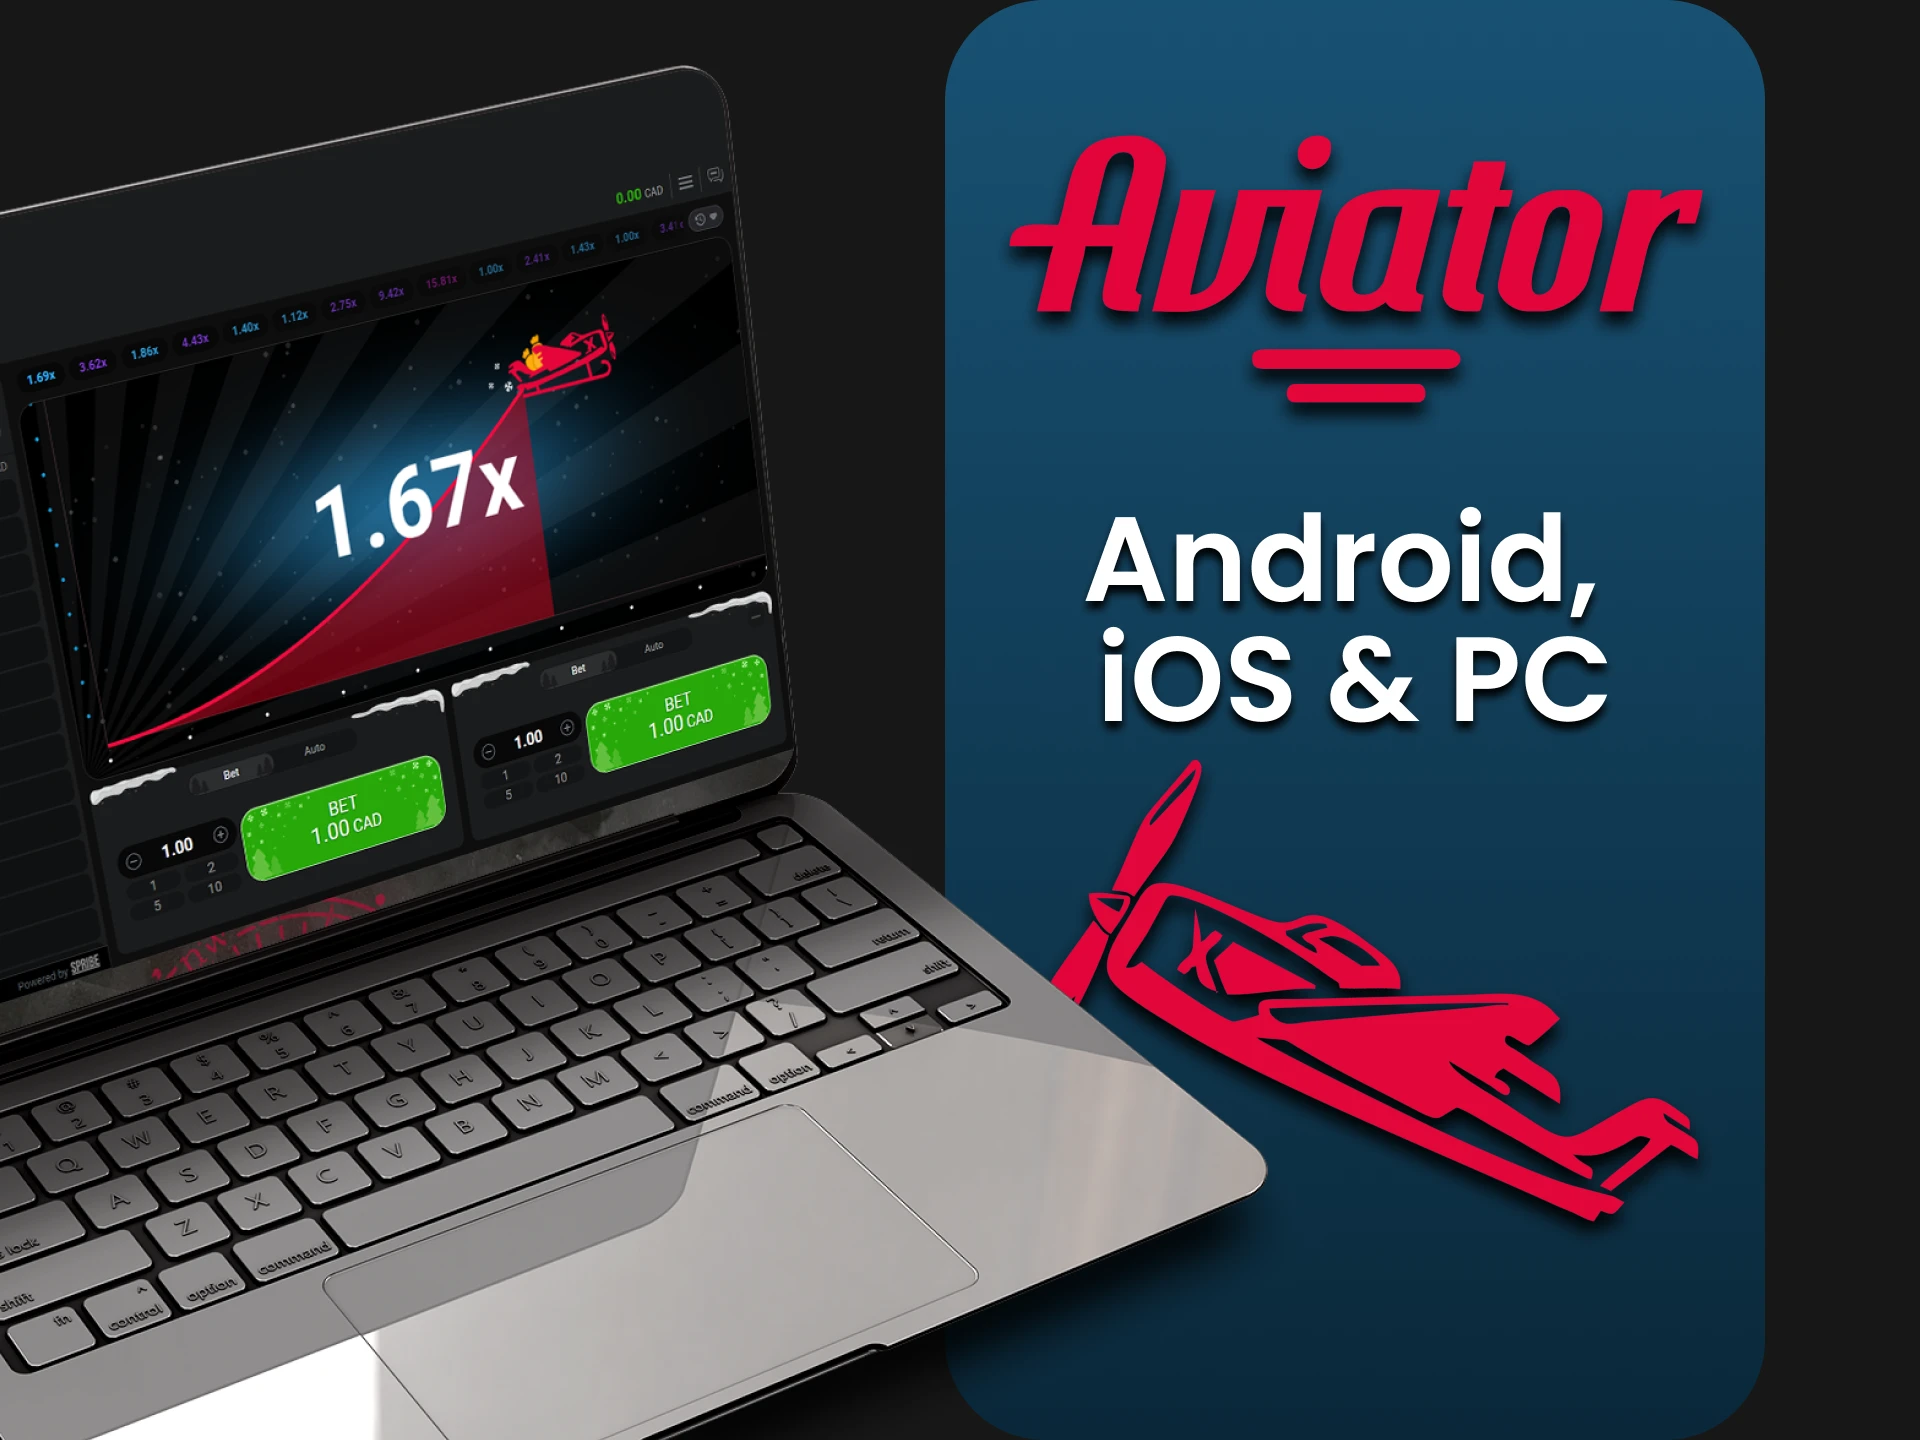 Download the Aviator application for PC.